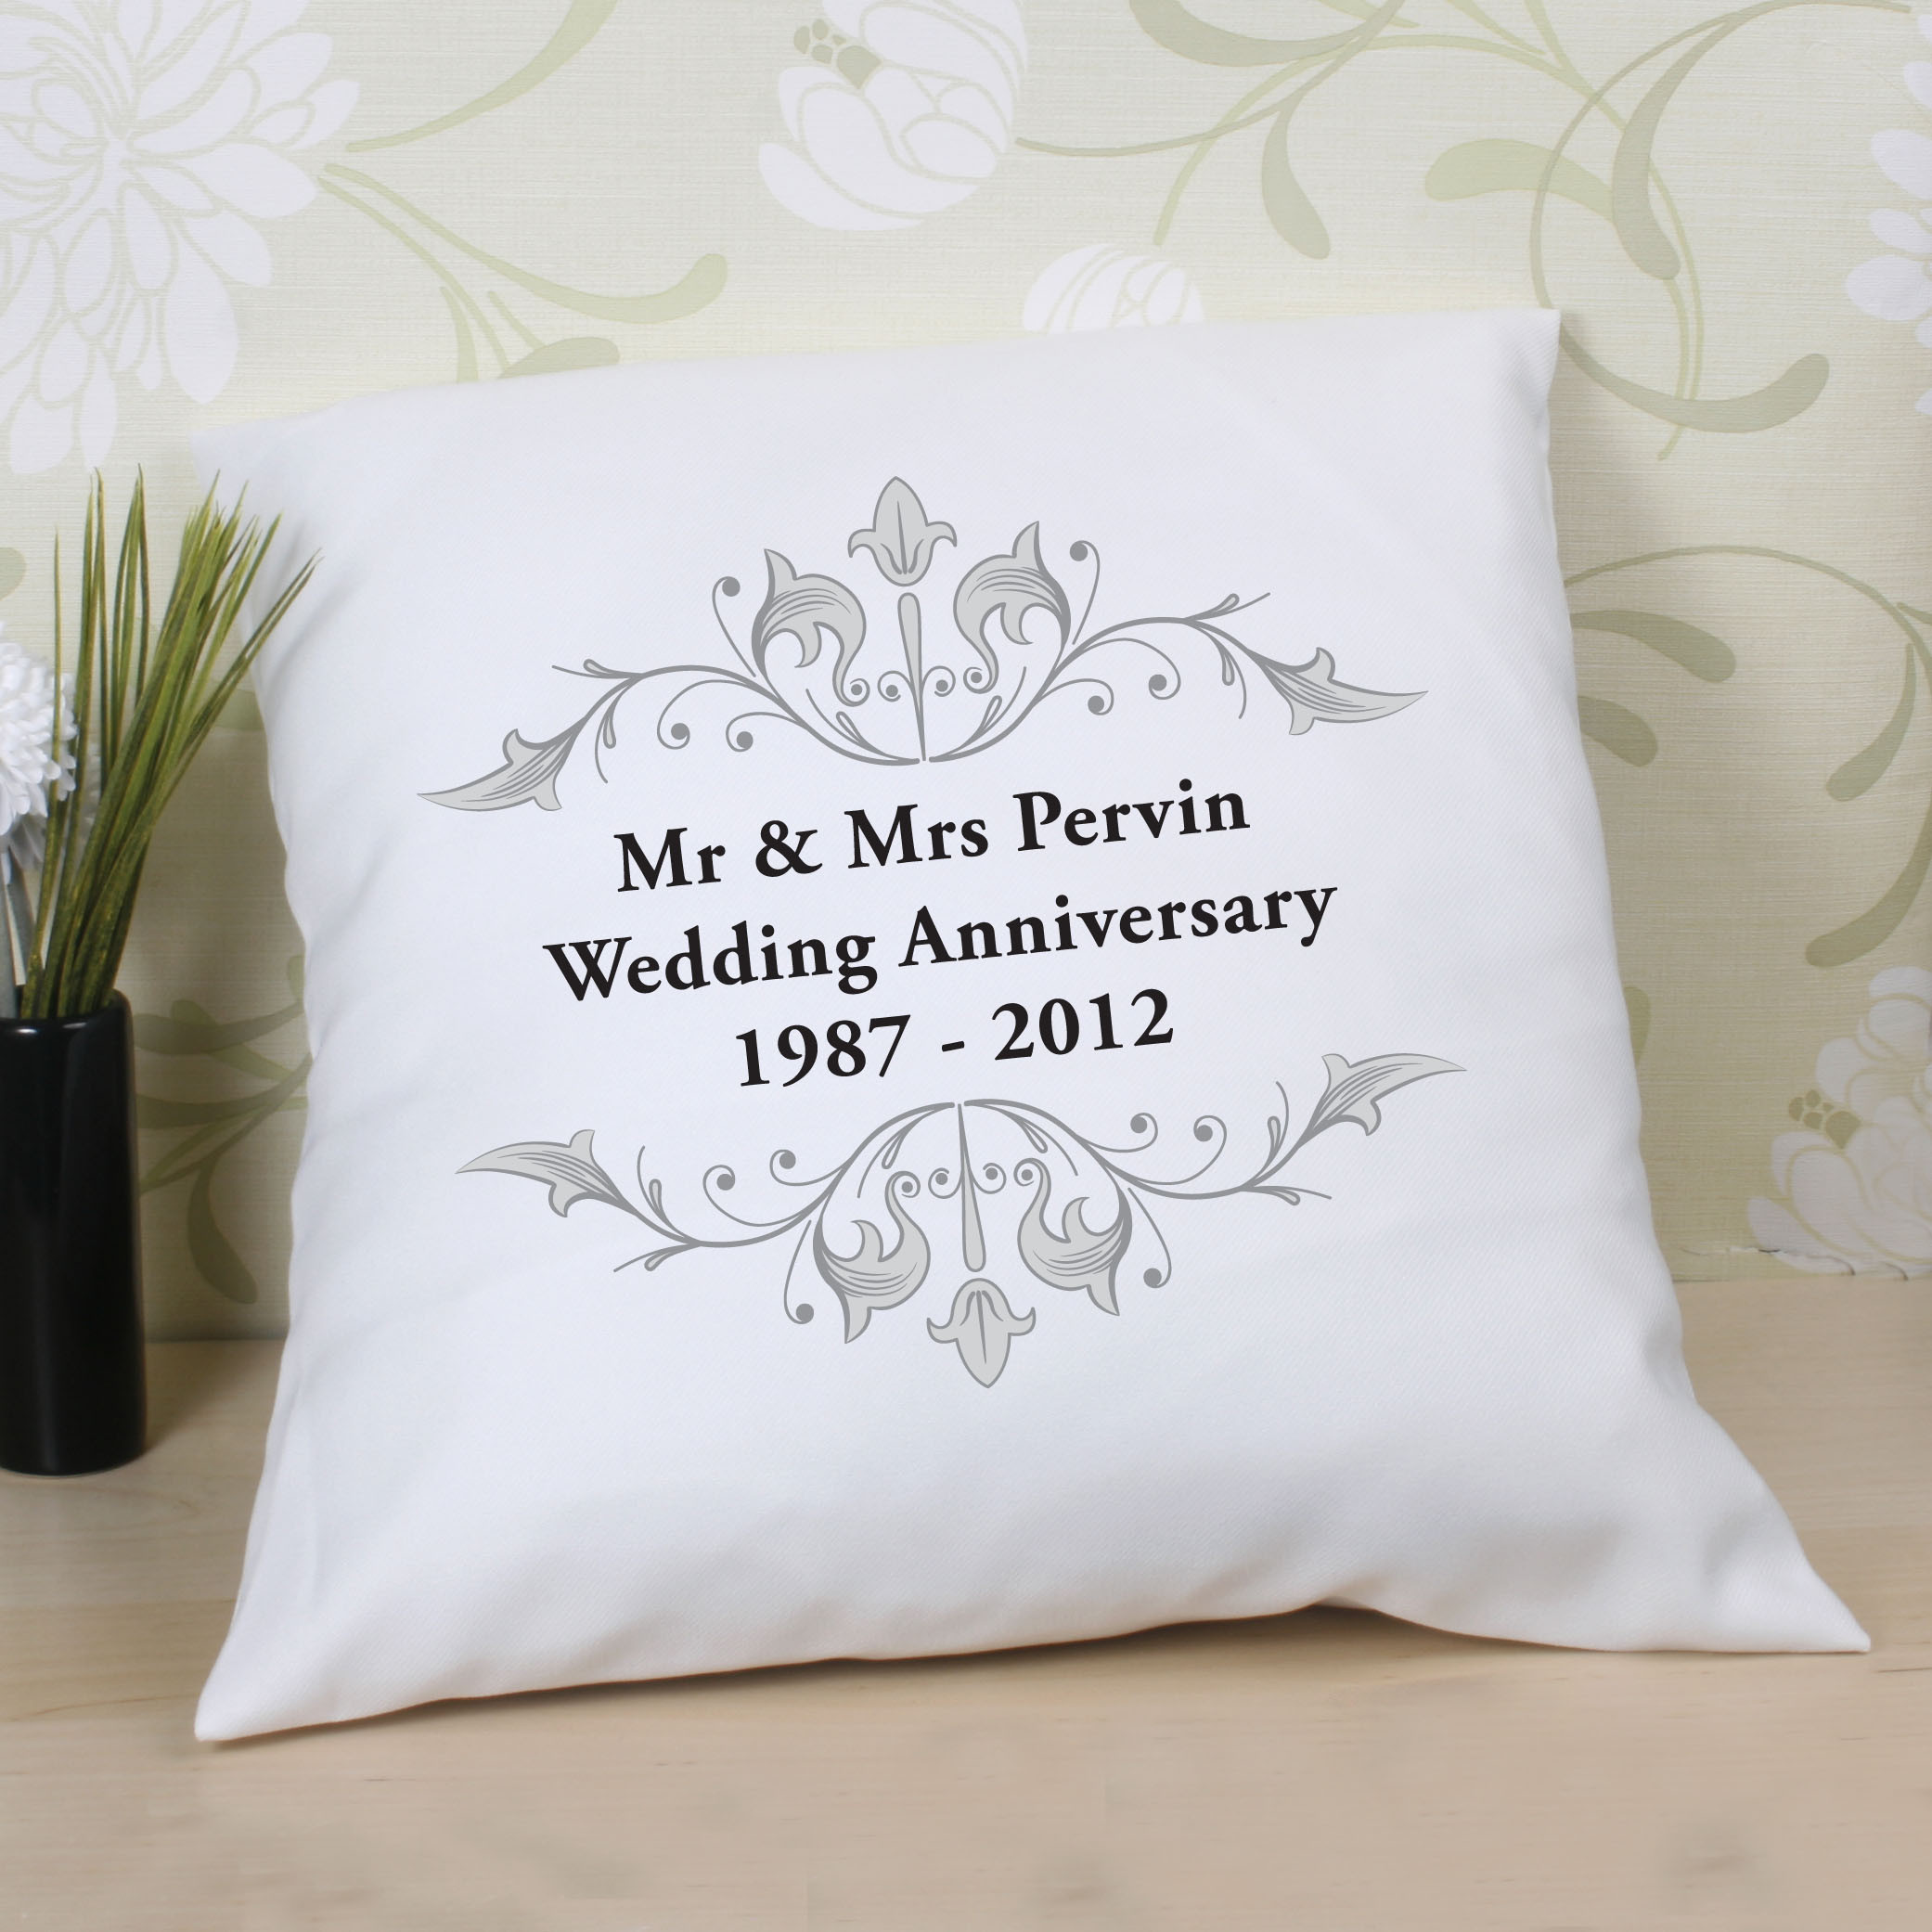 45Th Wedding Anniversary Gift Ideas For Husband
 The top 20 Ideas About 45th Wedding Anniversary Gift Ideas